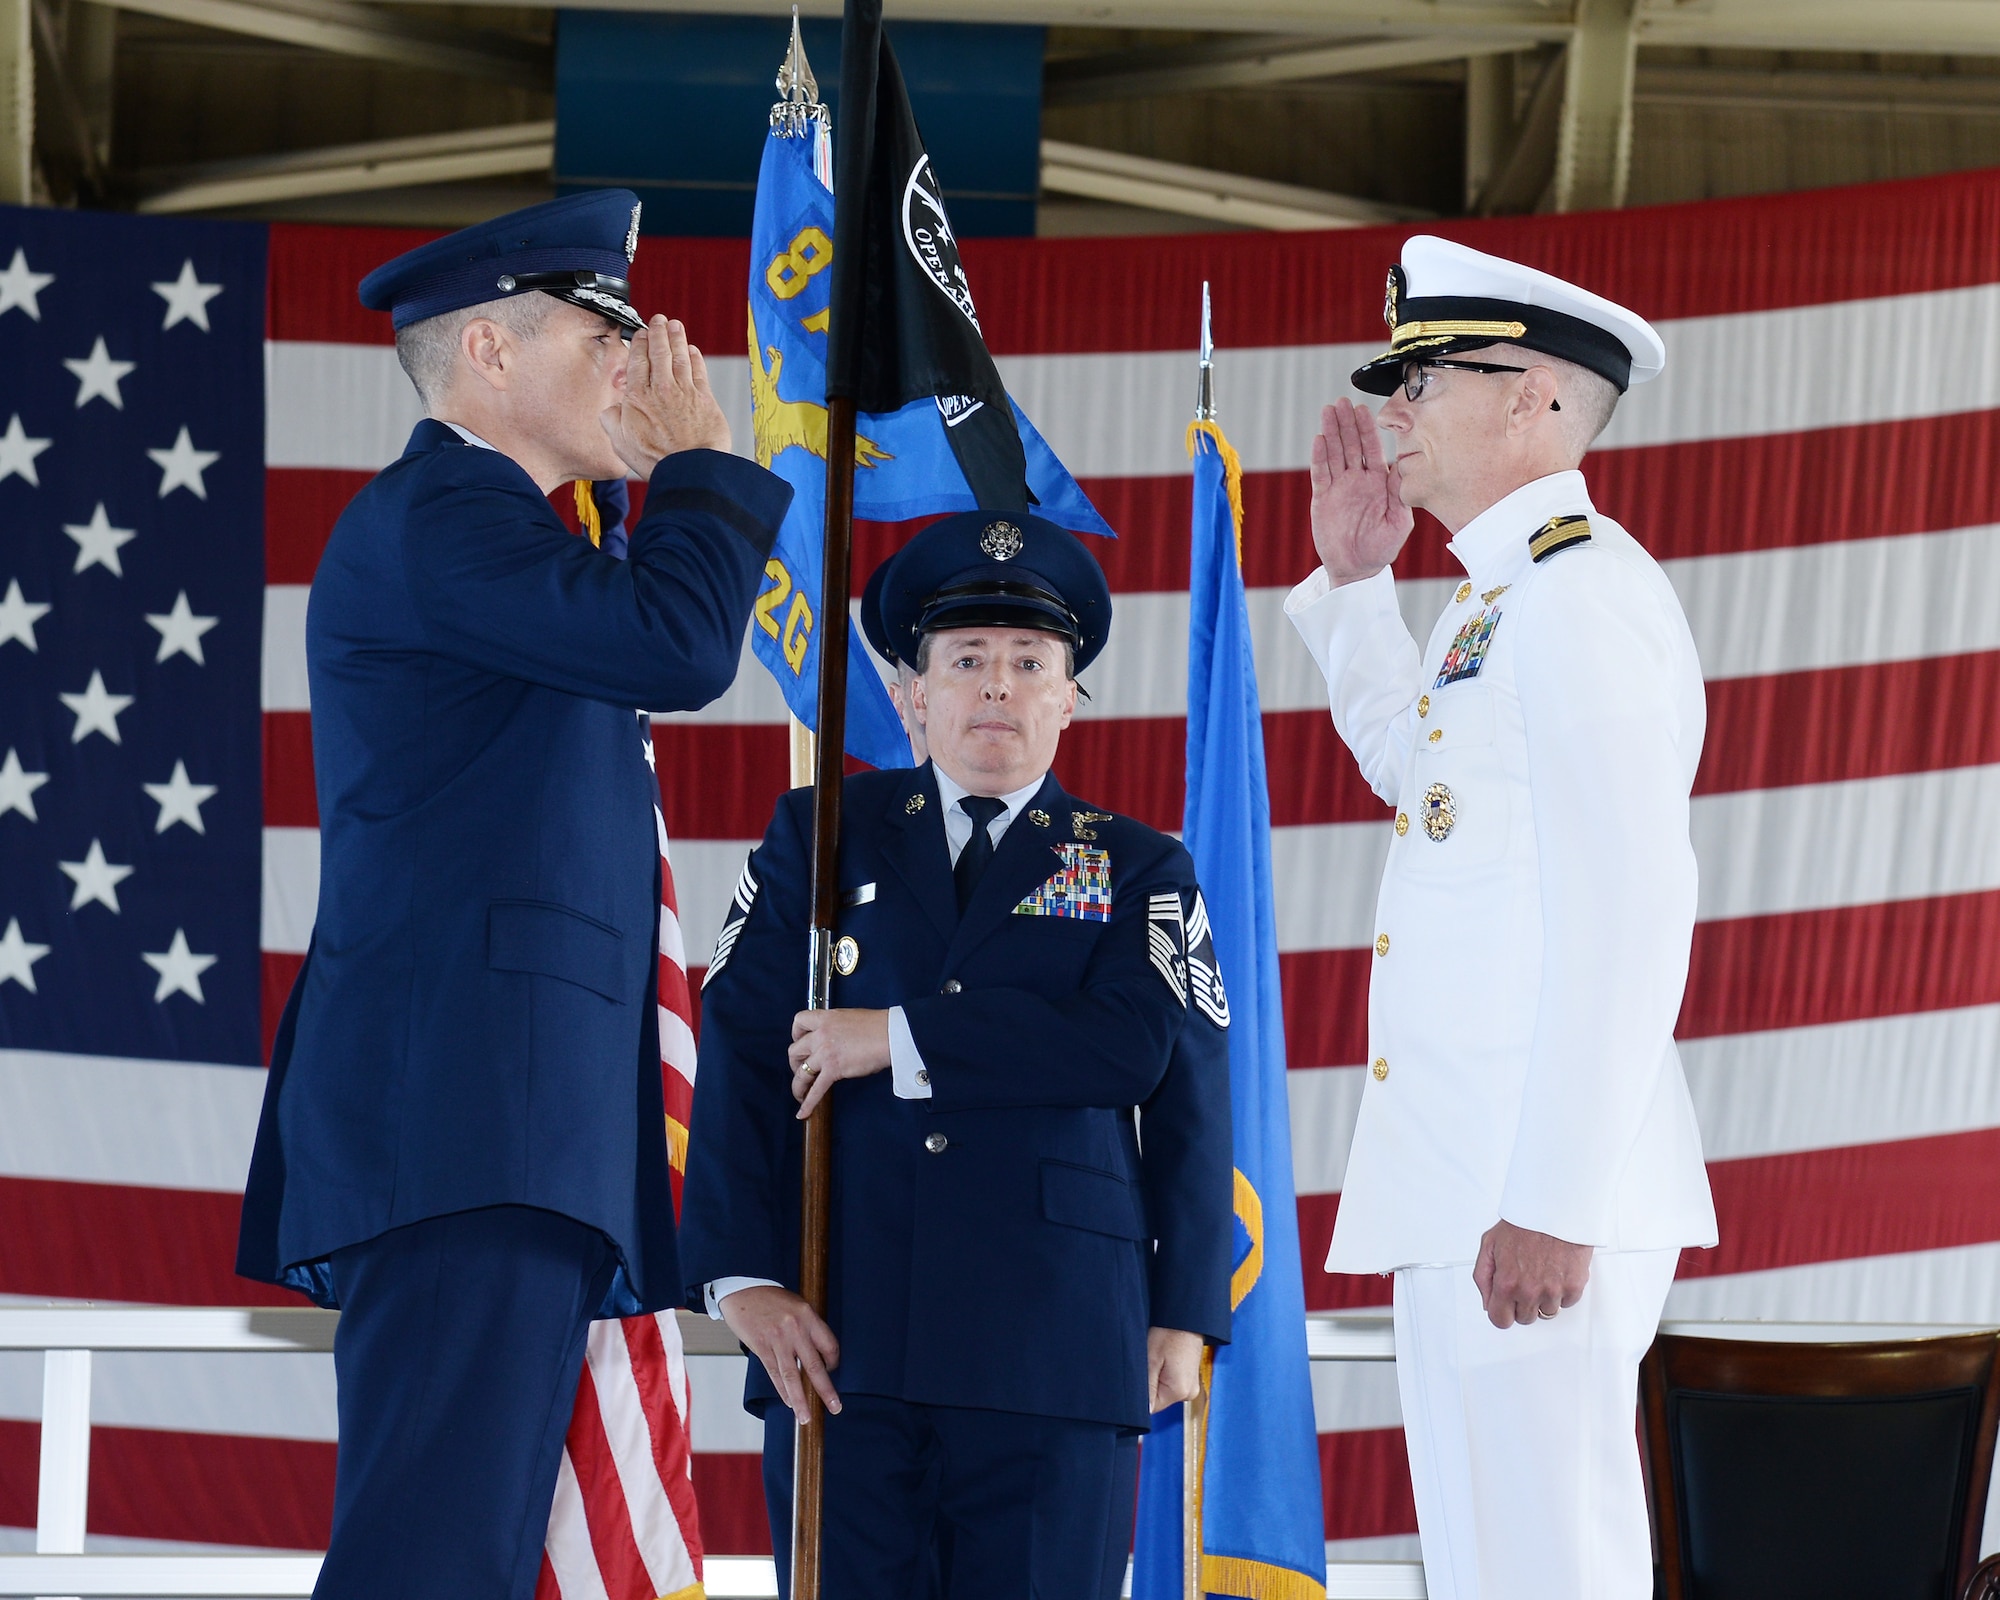 U.S. Air Force Maj. Gen. Thomas Bussiere, Eighth Air Force and Joint-Global Strike Operations Center commander (left) and U.S. Navy Capt. Dennis Crews, outgoing NAOC commander (right), exchange salutes during the dual-595th Command and Control Group and National Airborne Operations Center change of command ceremony July 27, 2018, at Offutt Air Force Base, Nebraska as a single commander assumed responsibility for both organizations. (U.S. Air Force photo by Charles Haymond)